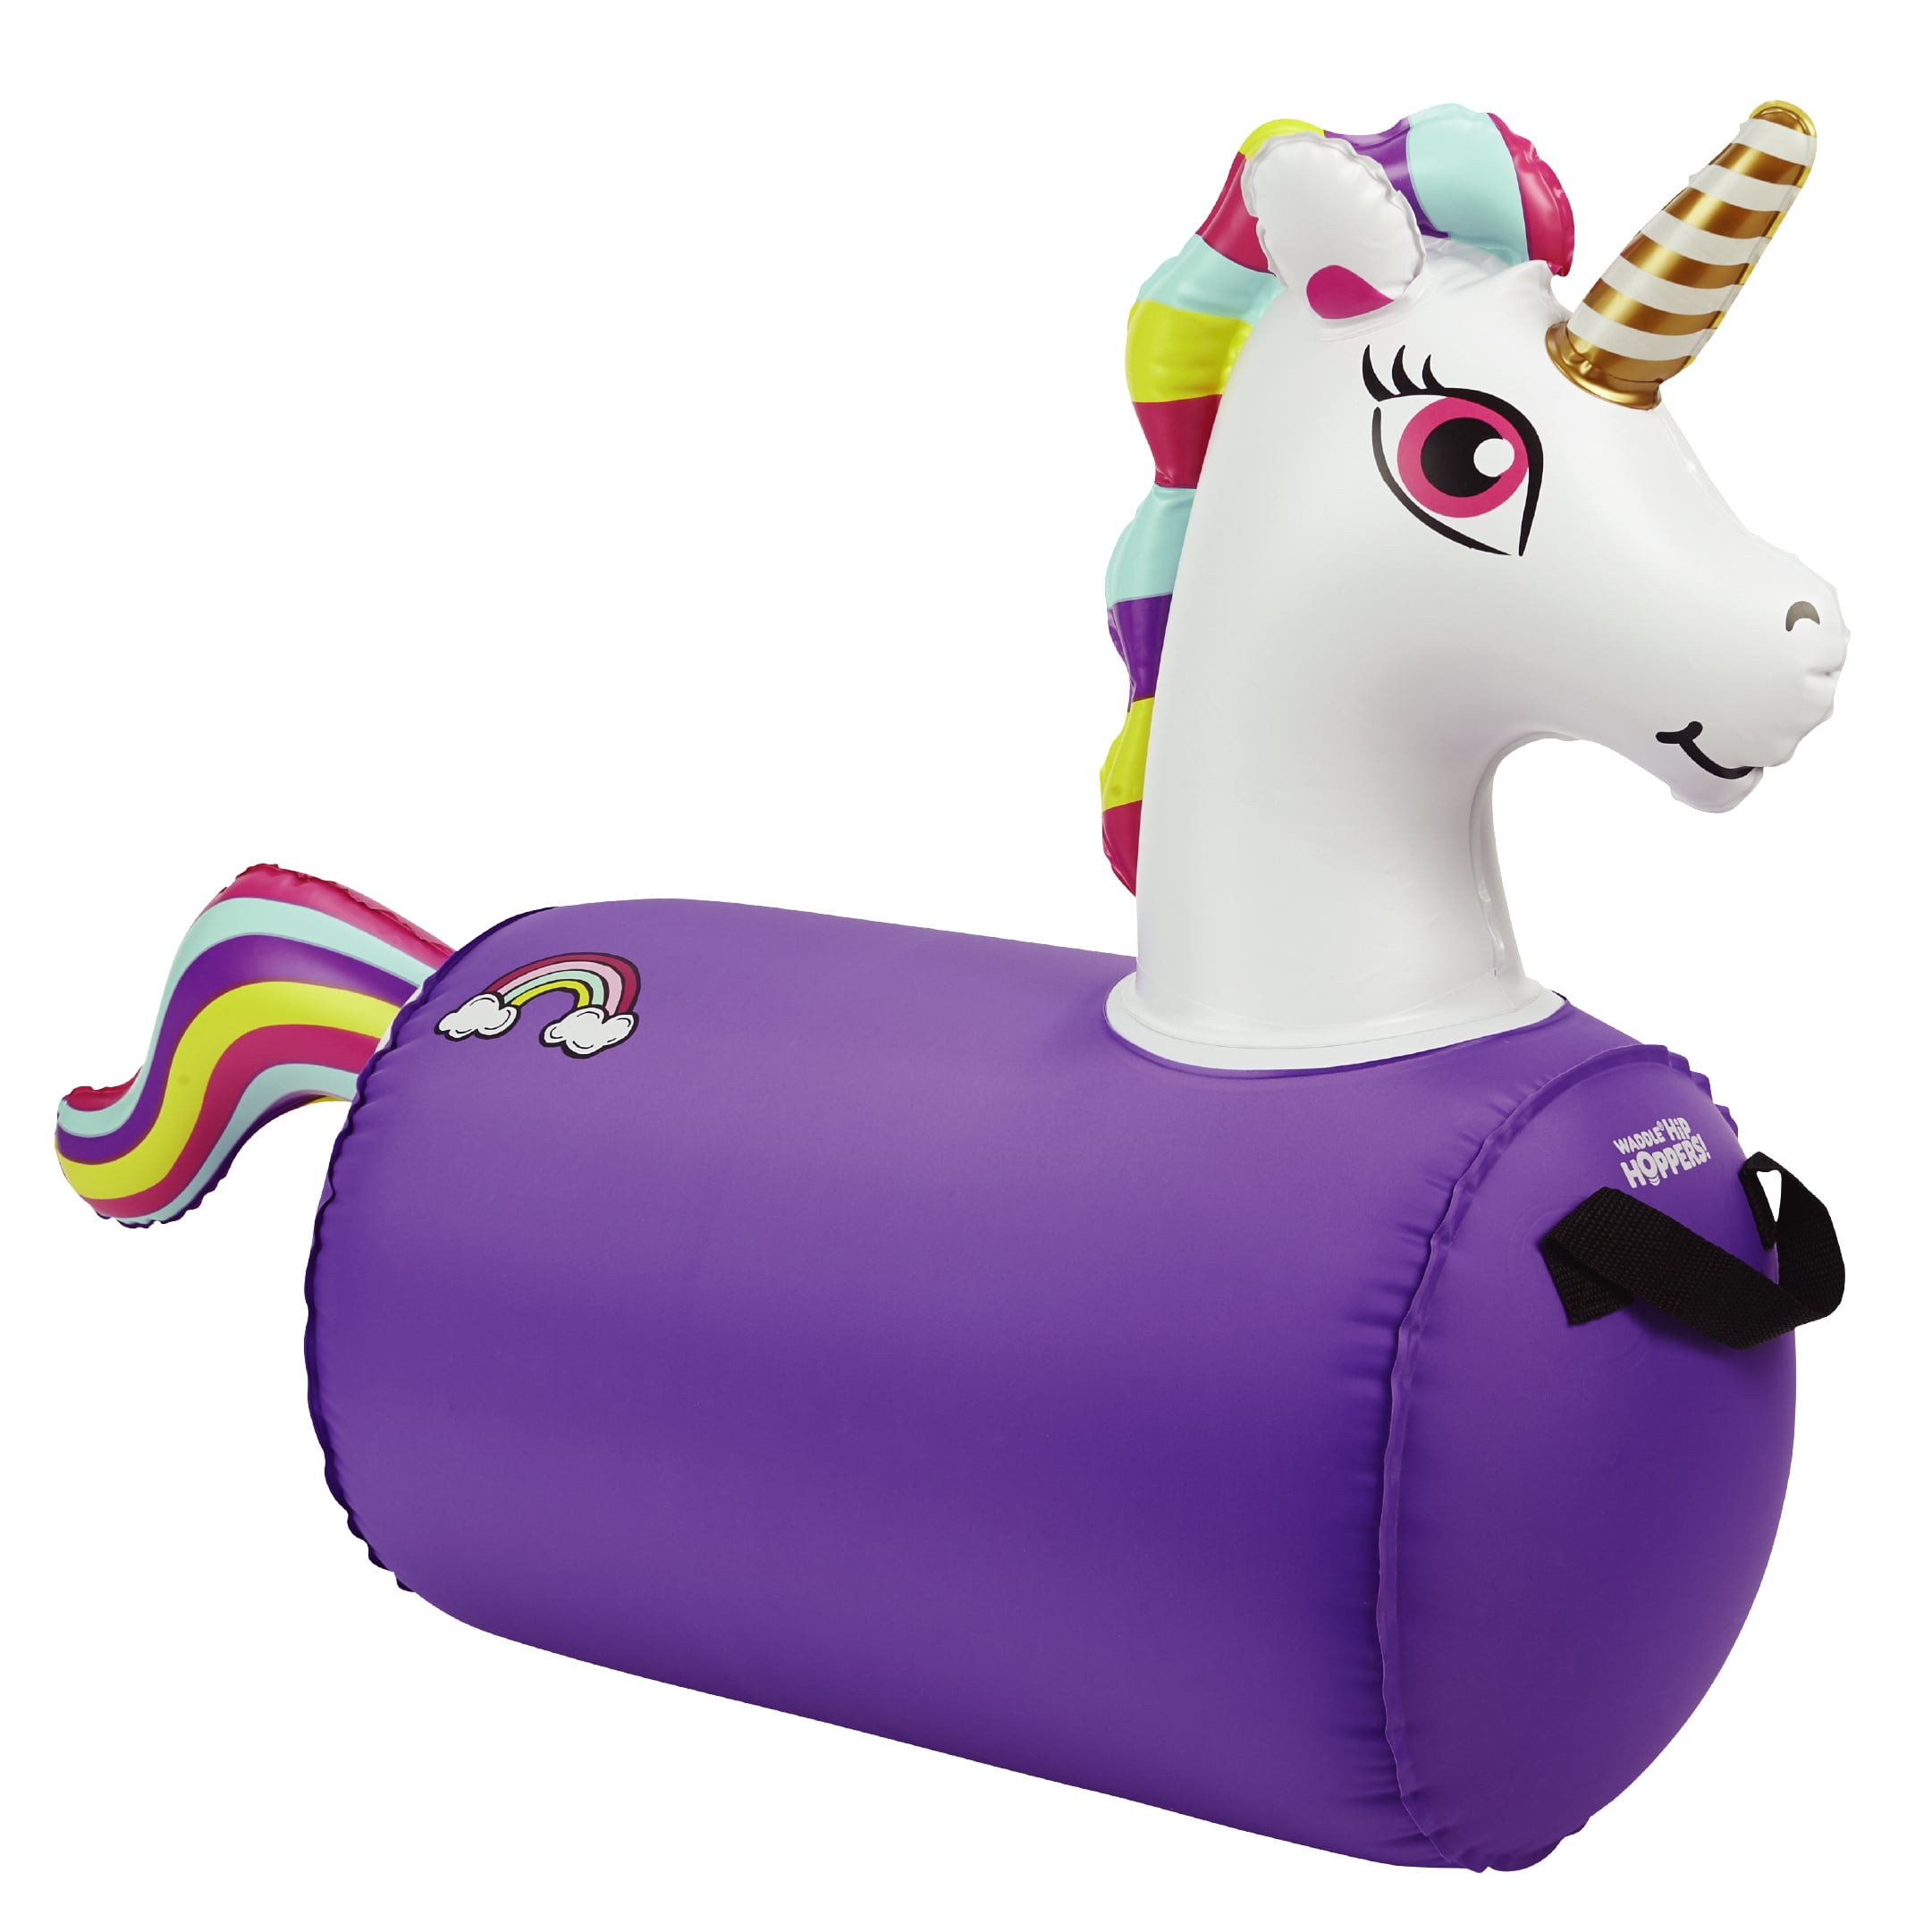 Kids Inflatable Unicorn Hopper Ball Hippity Hop Jumping Ride Toy Bouncer Handle